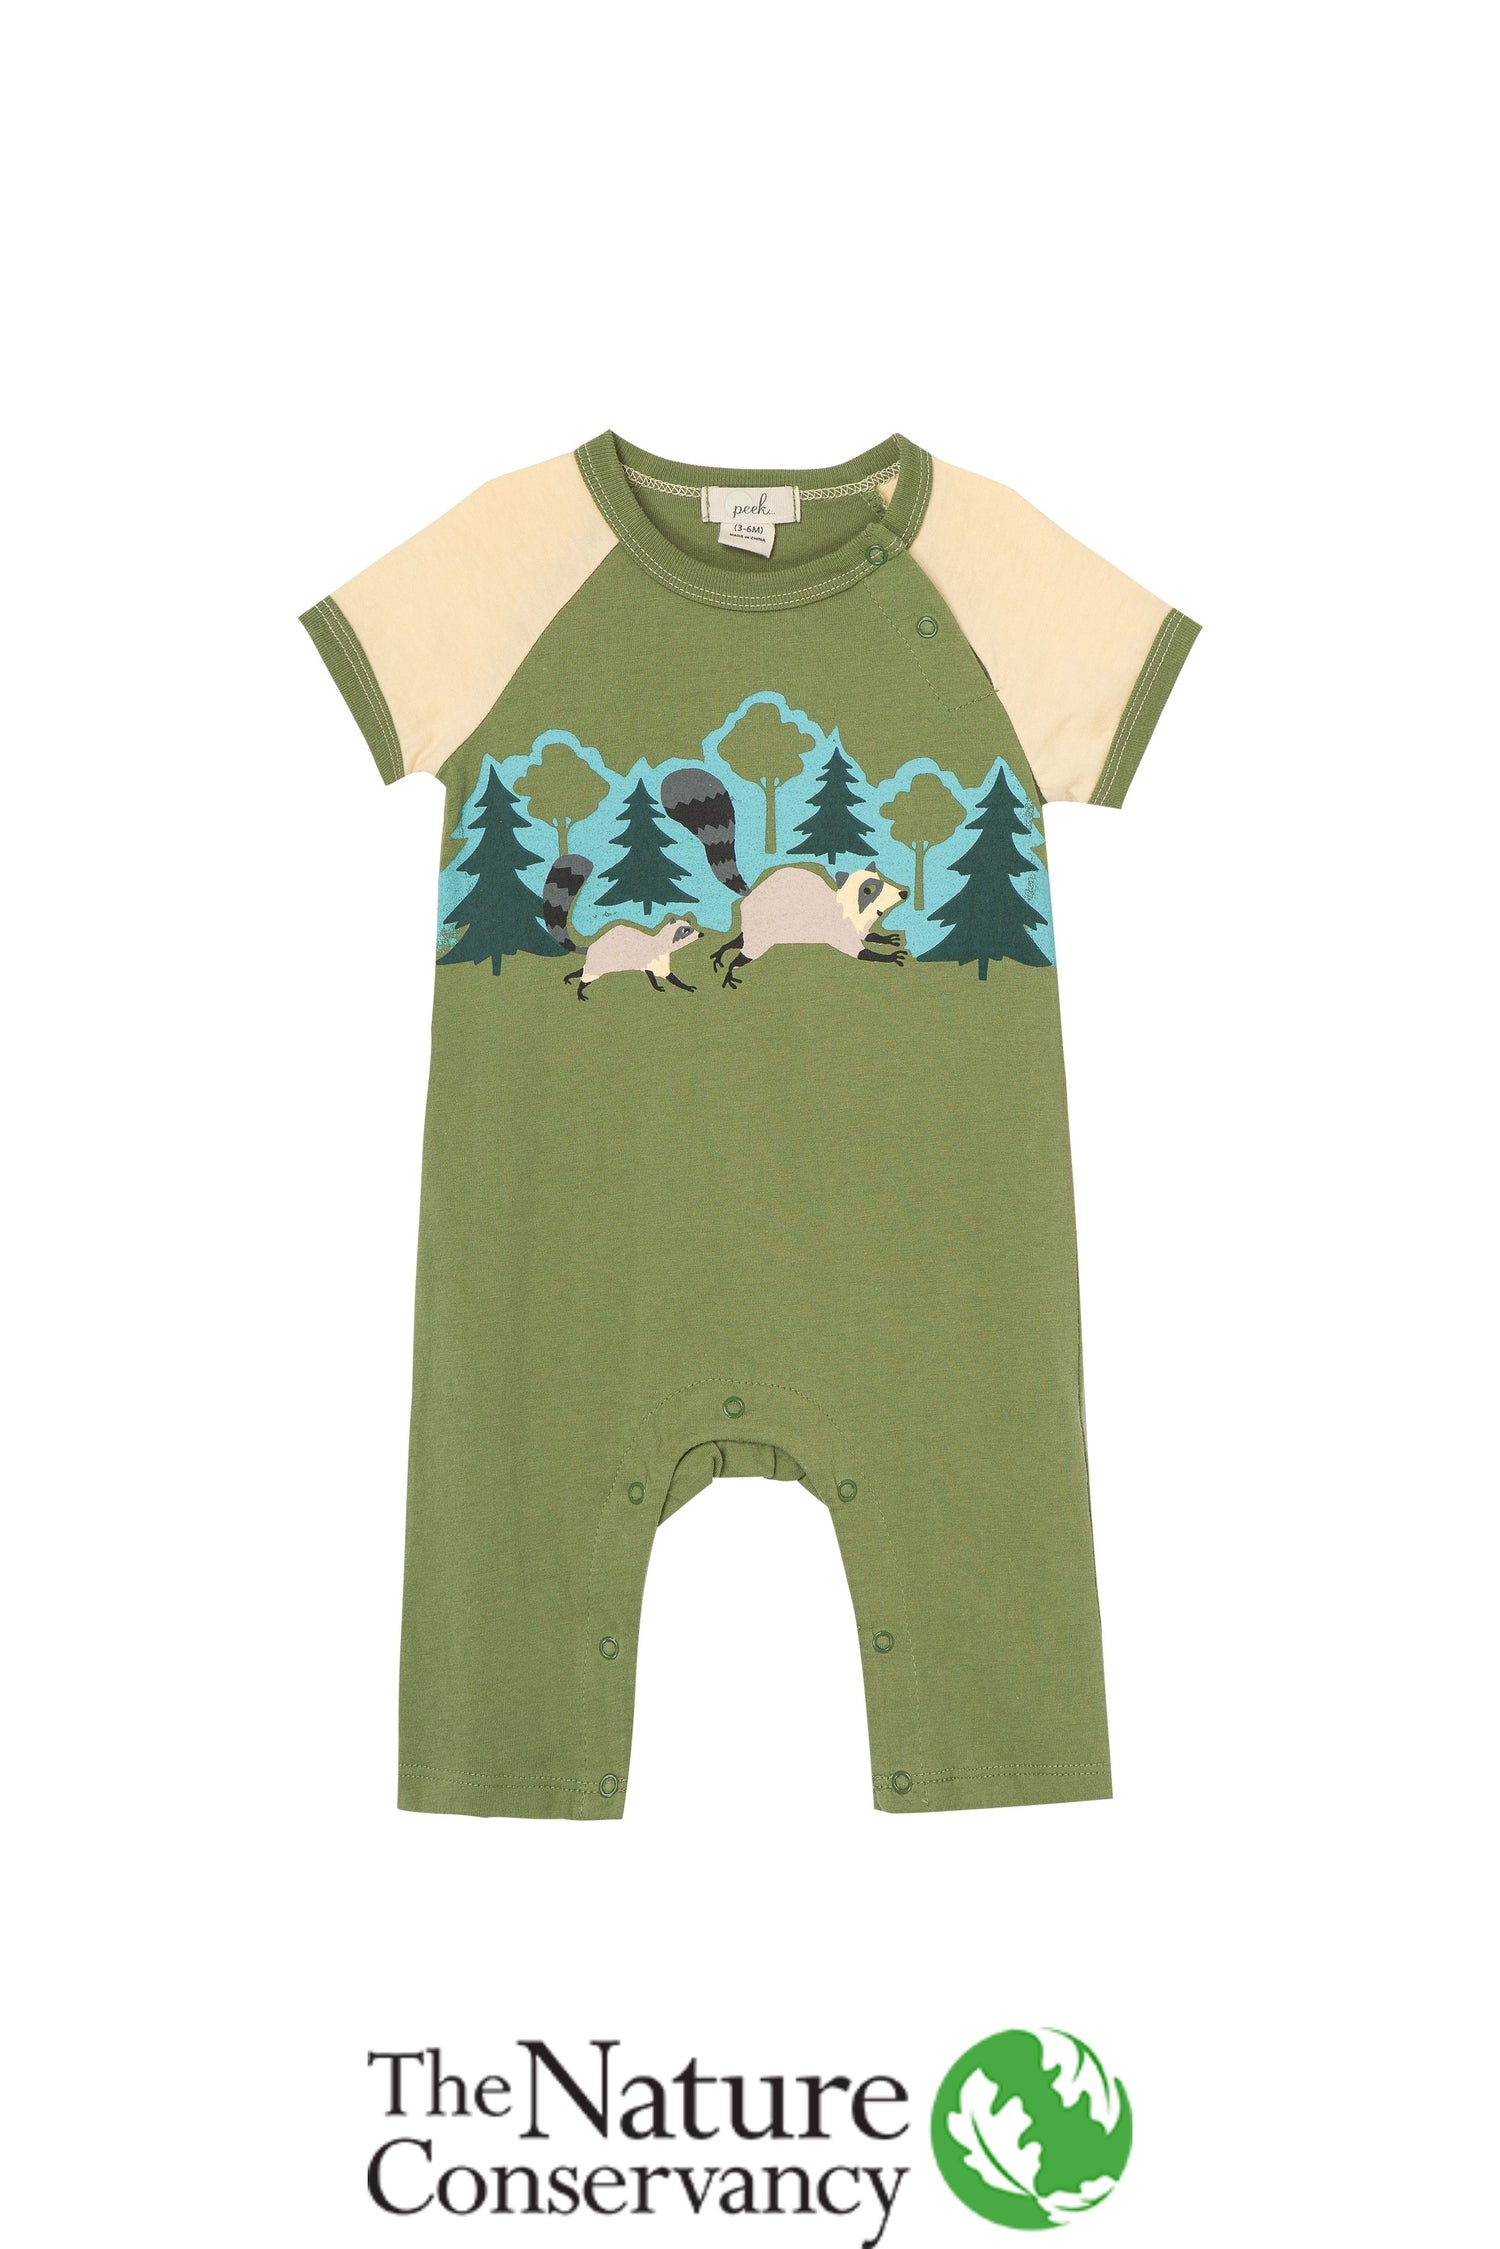 Green and off-white onesie with illustrated raccoons running through a forest